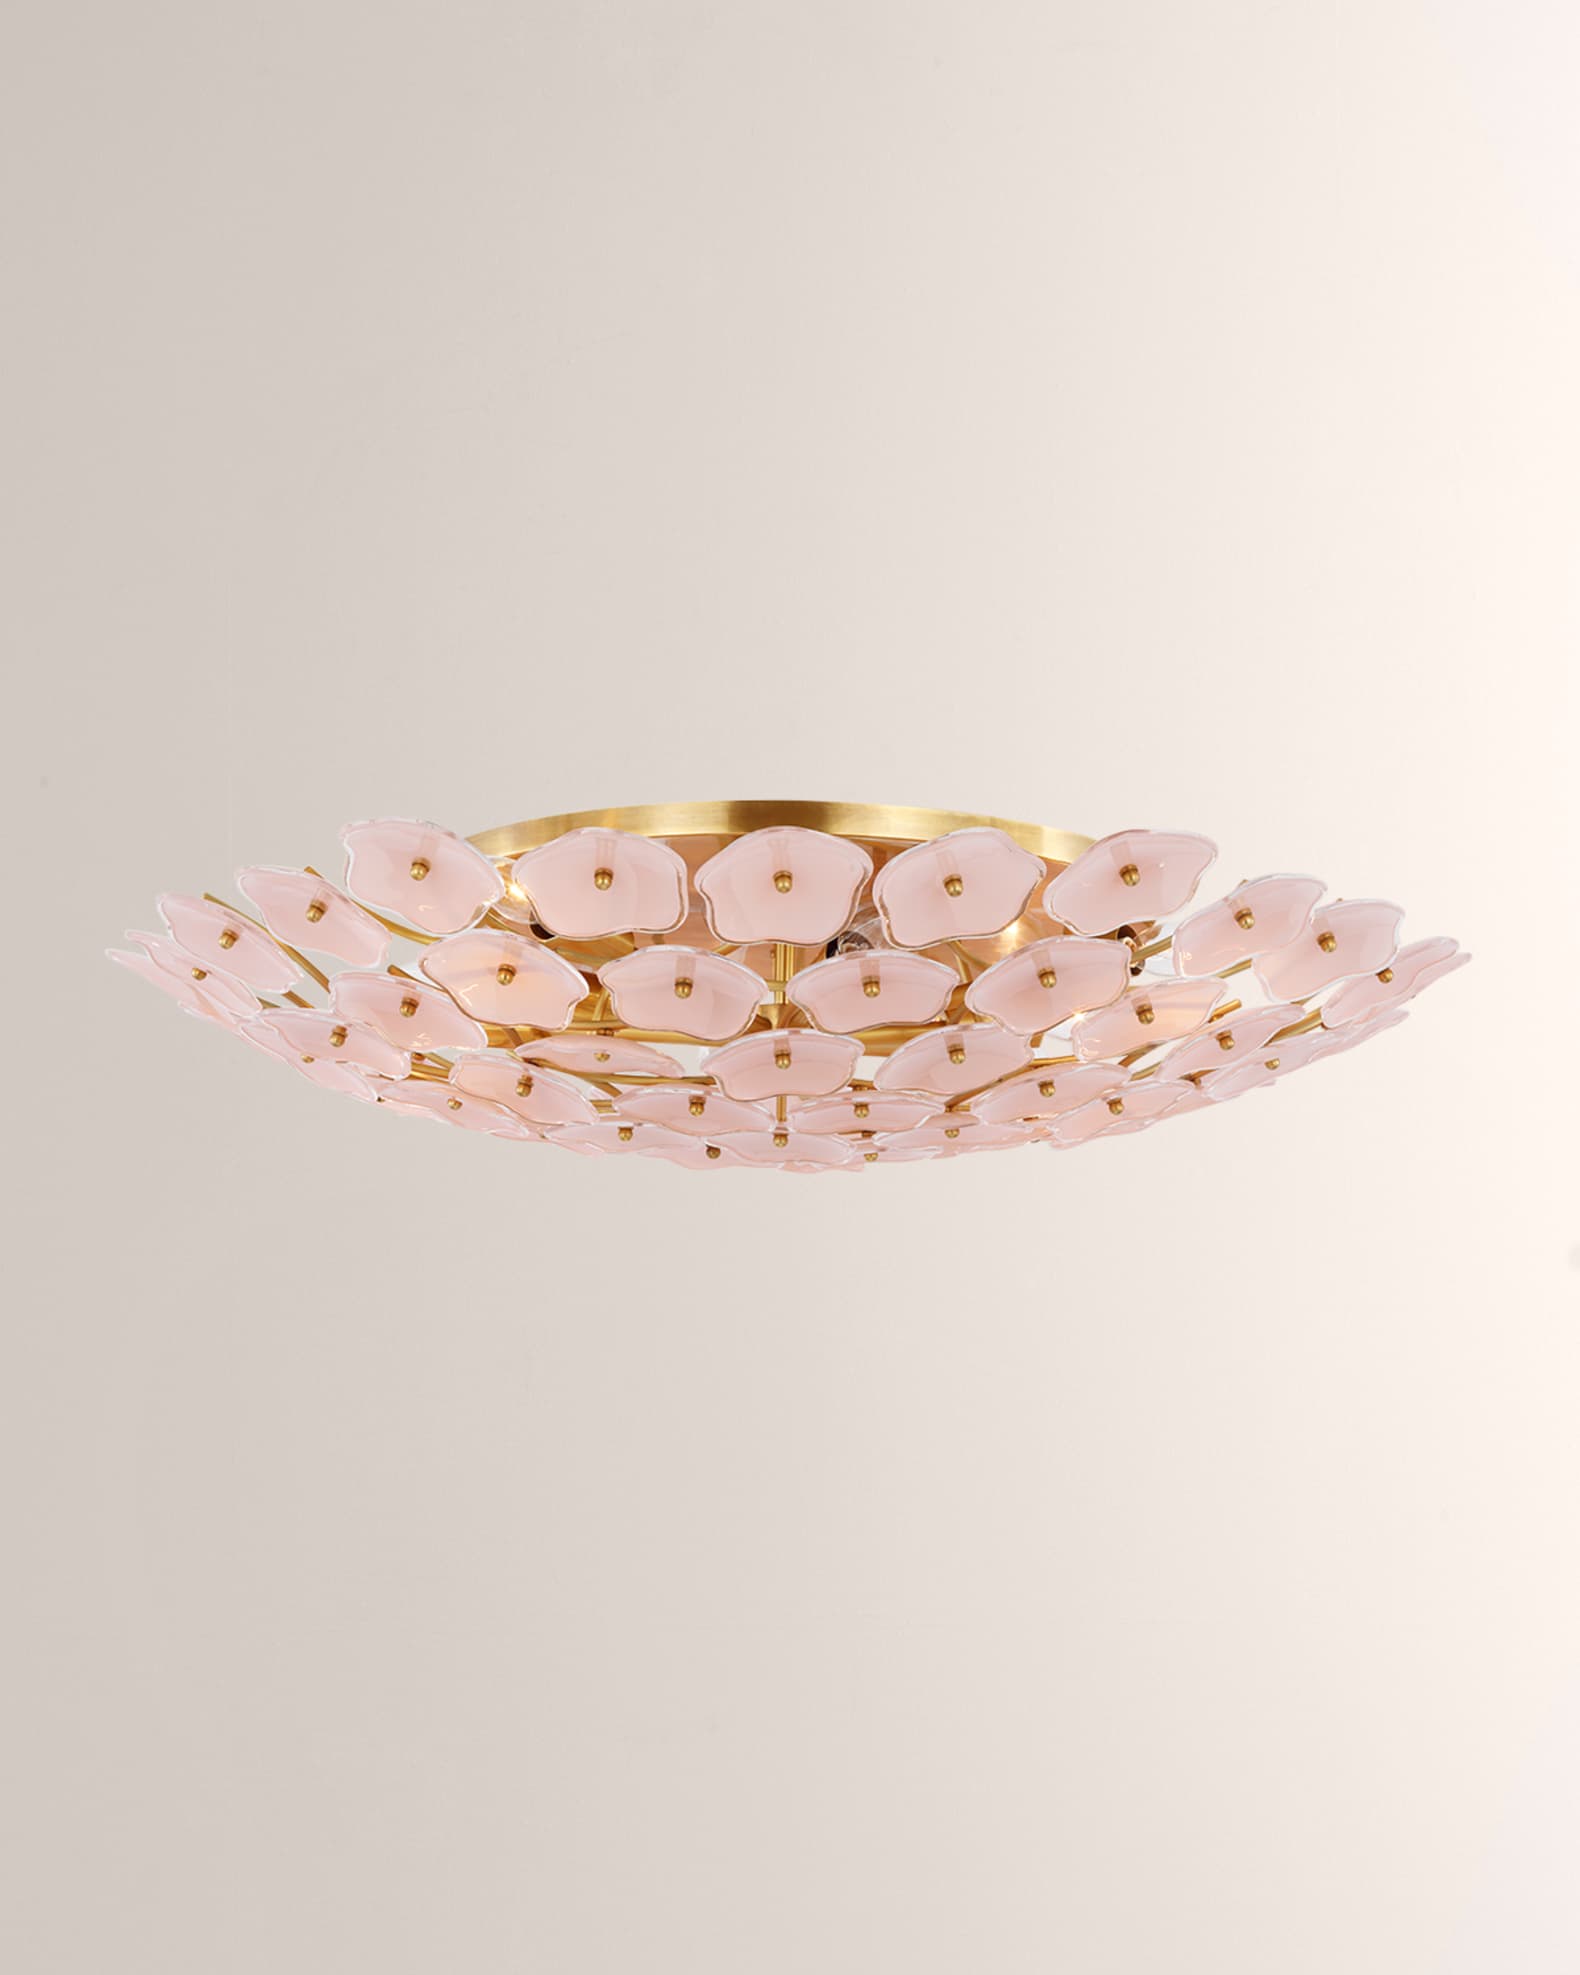 Kate Spade New York for Visual Comfort Signature Leighton Large Flush Mount  in Soft Brass with Blush Tinted Glass